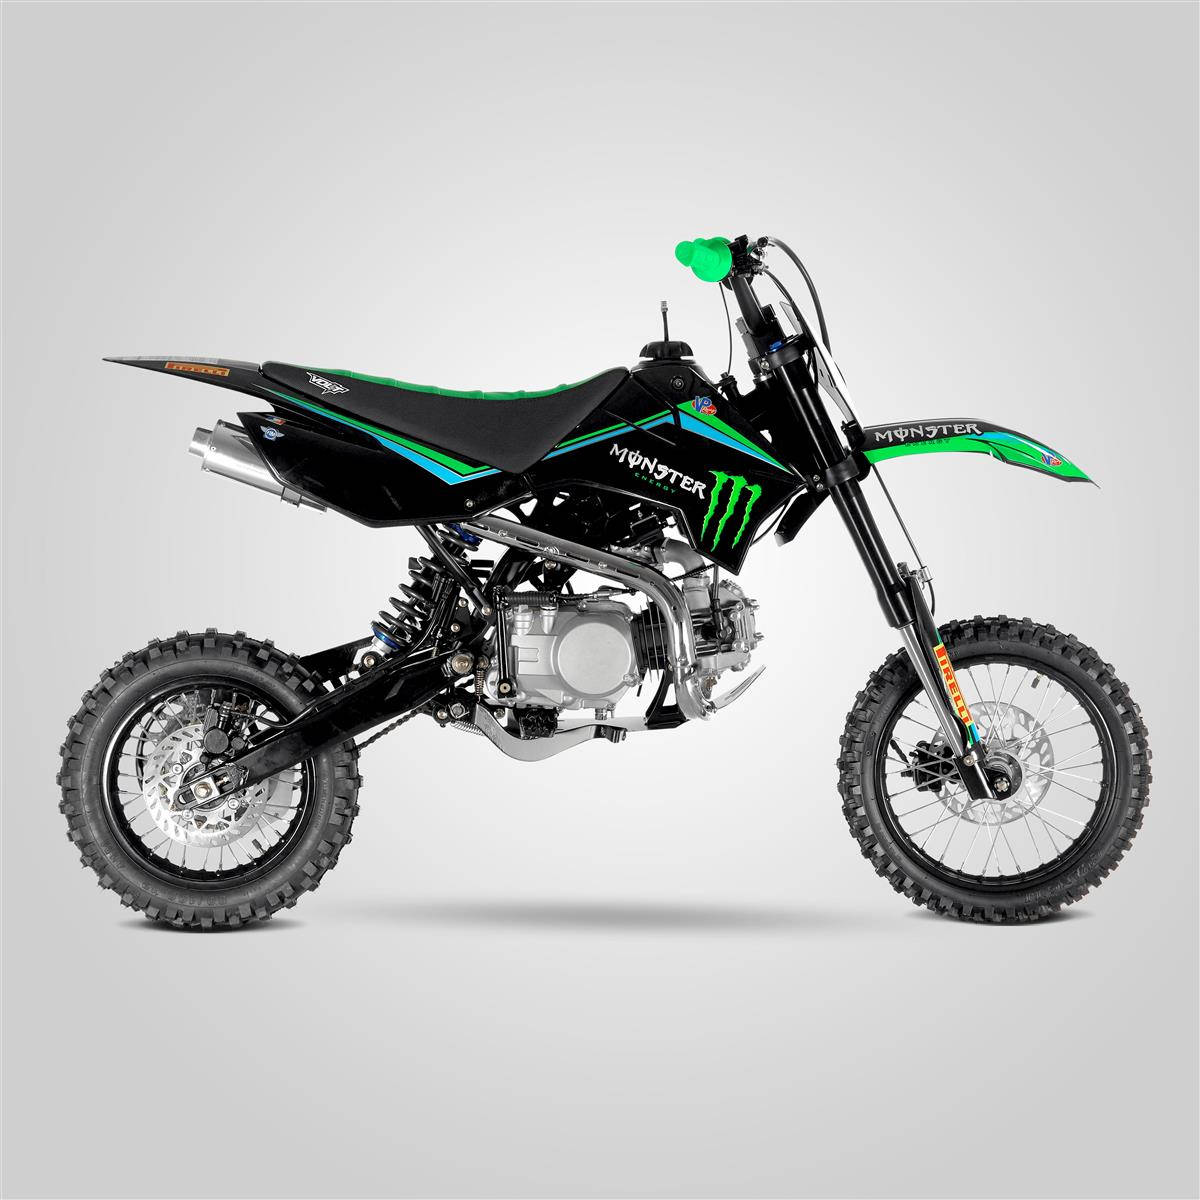 Explore Nature with a Monster Dirt Bike Wallpaper